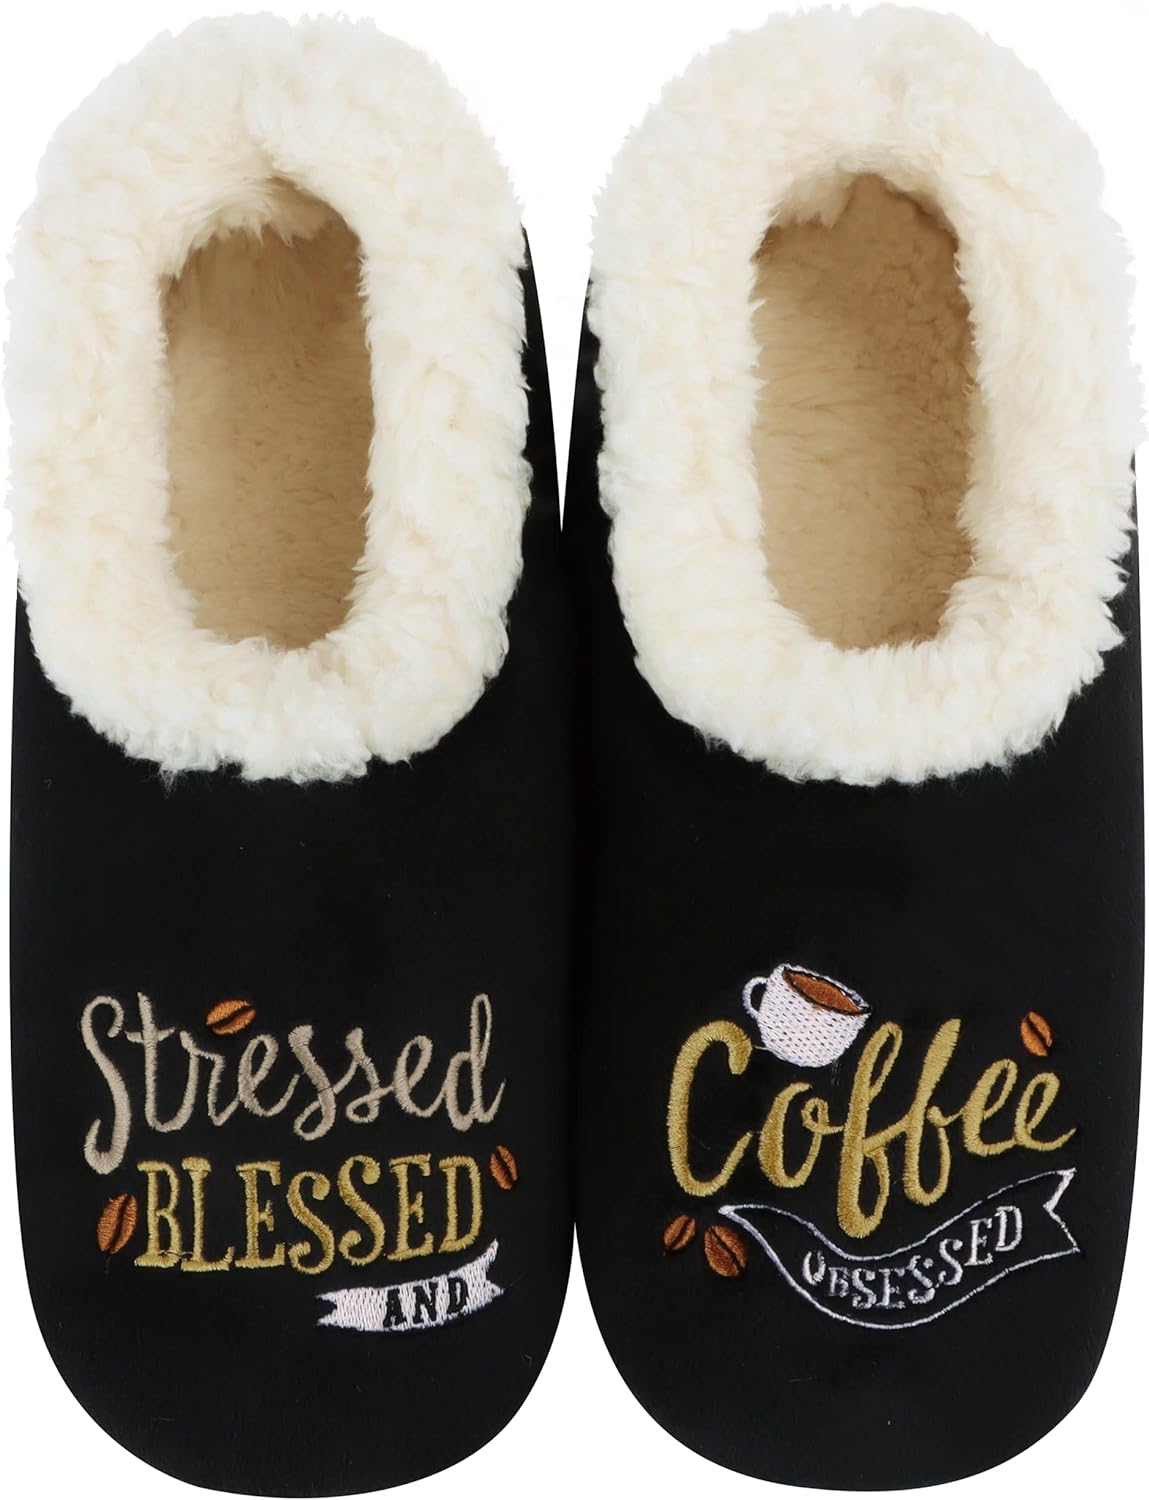 Stressed Blessed And Coffee Obsessed Fuzzy Pairable Slipper Socks Christian Gift Idea claimedbygoddesigns